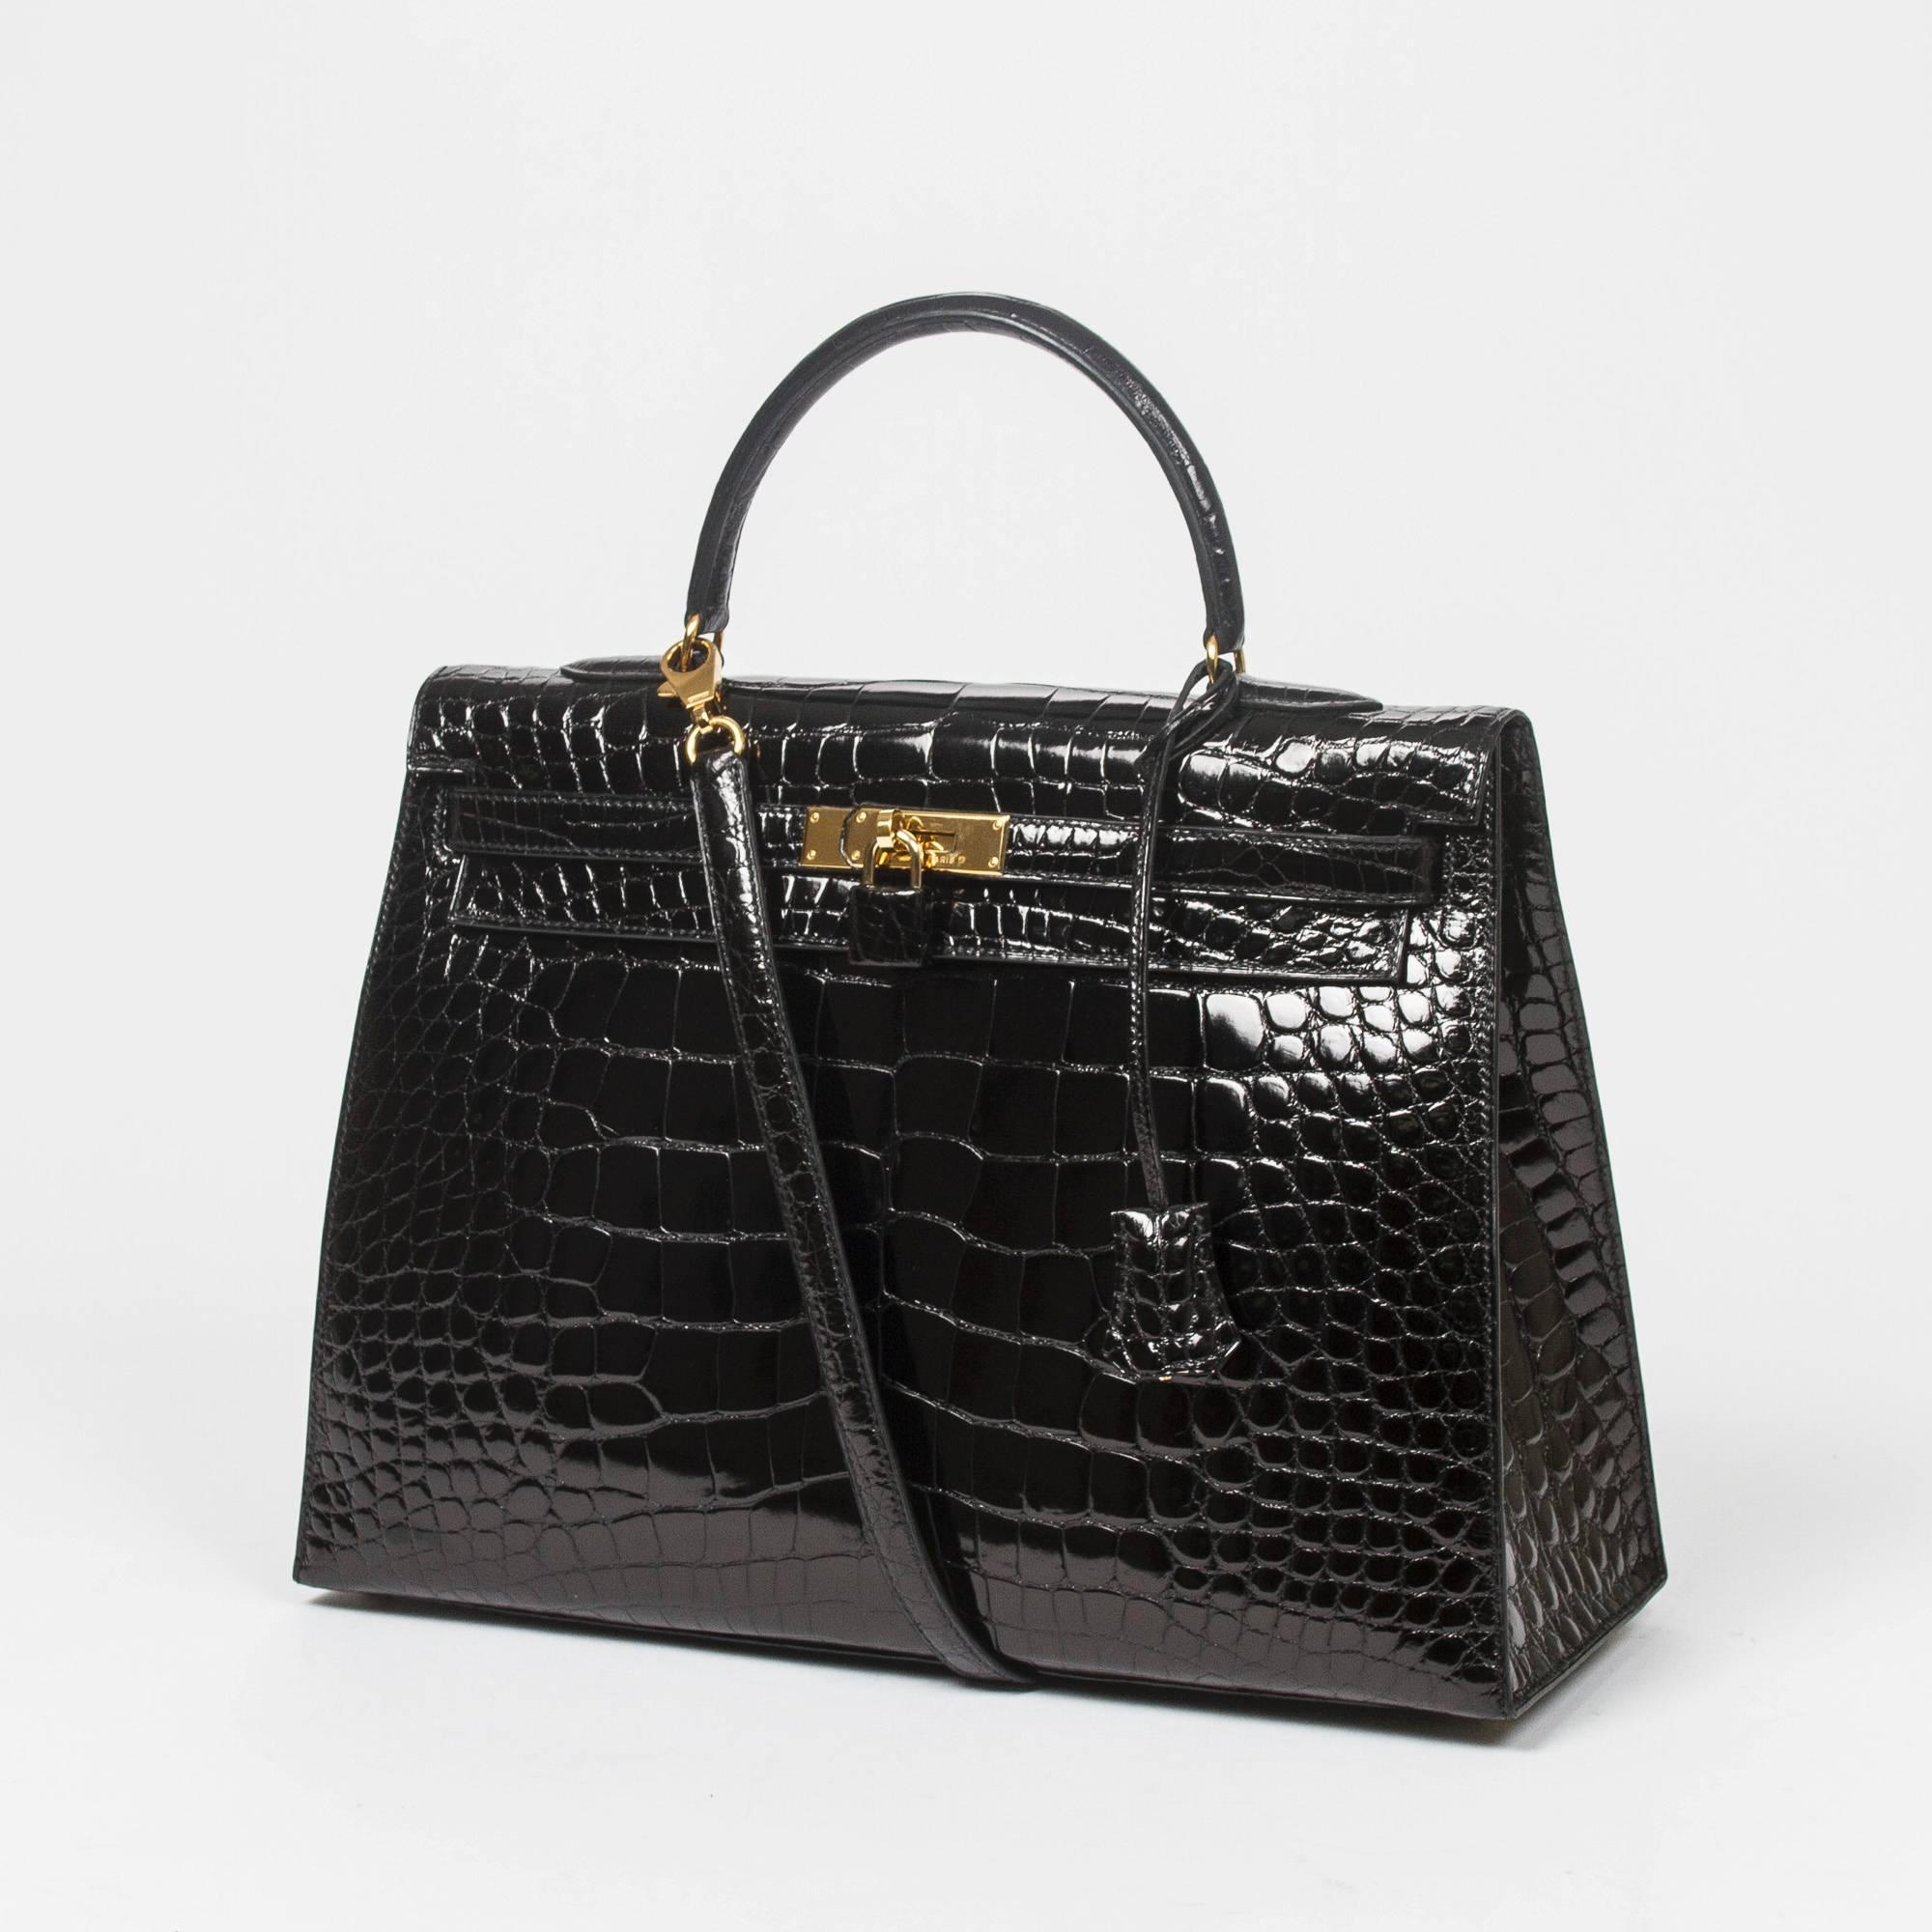 Kelly Sellier 35 in black alligator with strap, cadenas and keys in clochette, gold tone hardware. Interior lined in black chèvre leather with 2 slip pockets and one zip pocket. Stamp A in square. Model from 1997. Box and dustbag included. Gentle